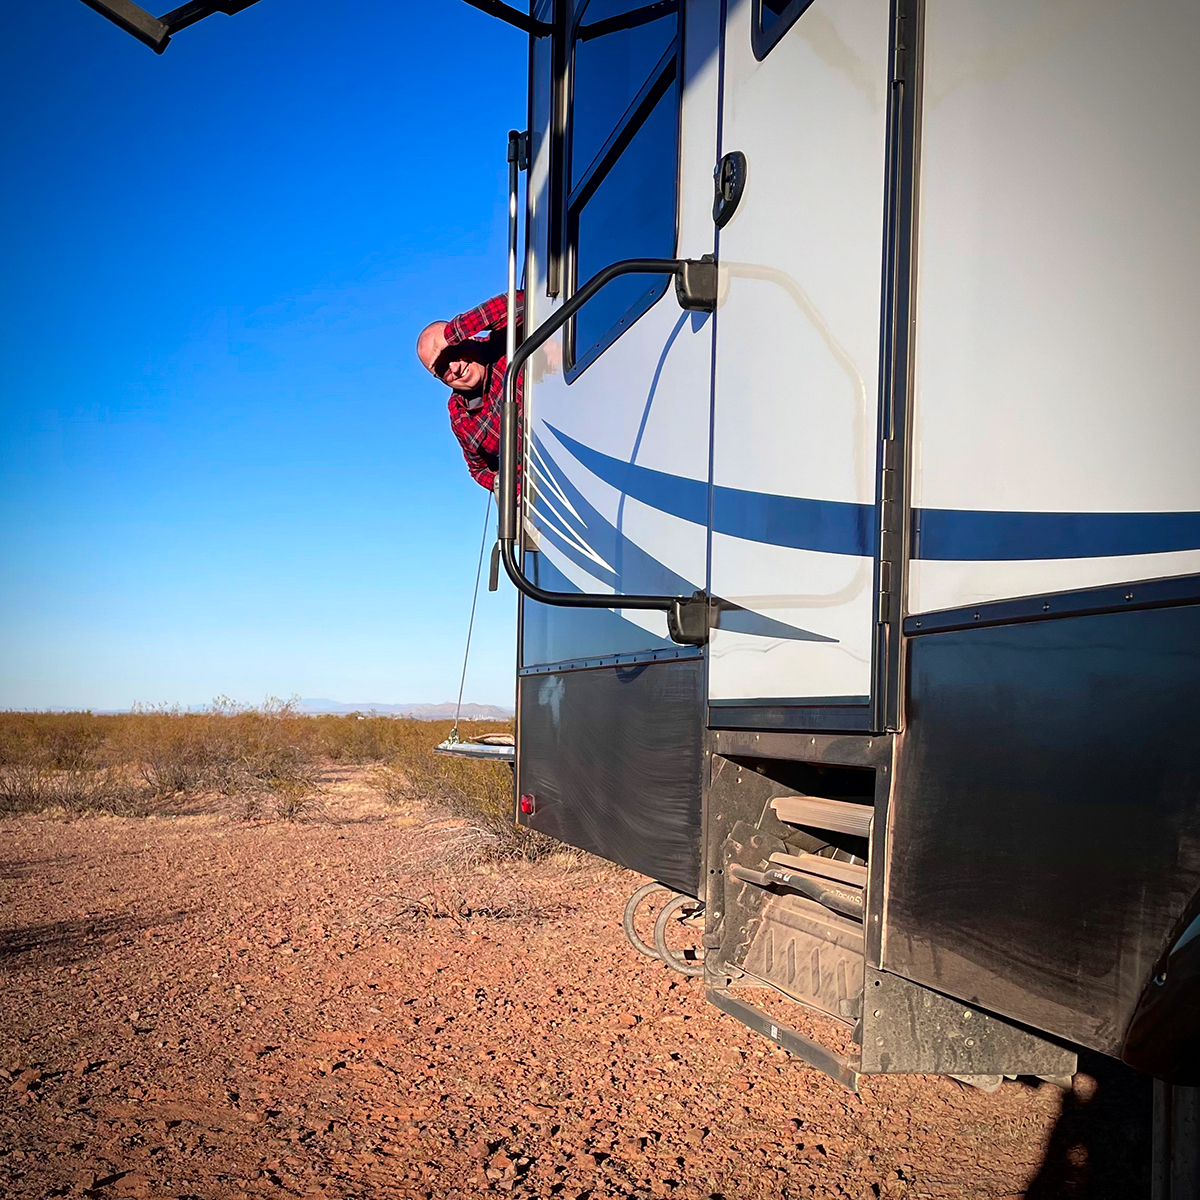 Steve peaking around the back of our RV in the Arizona desert.